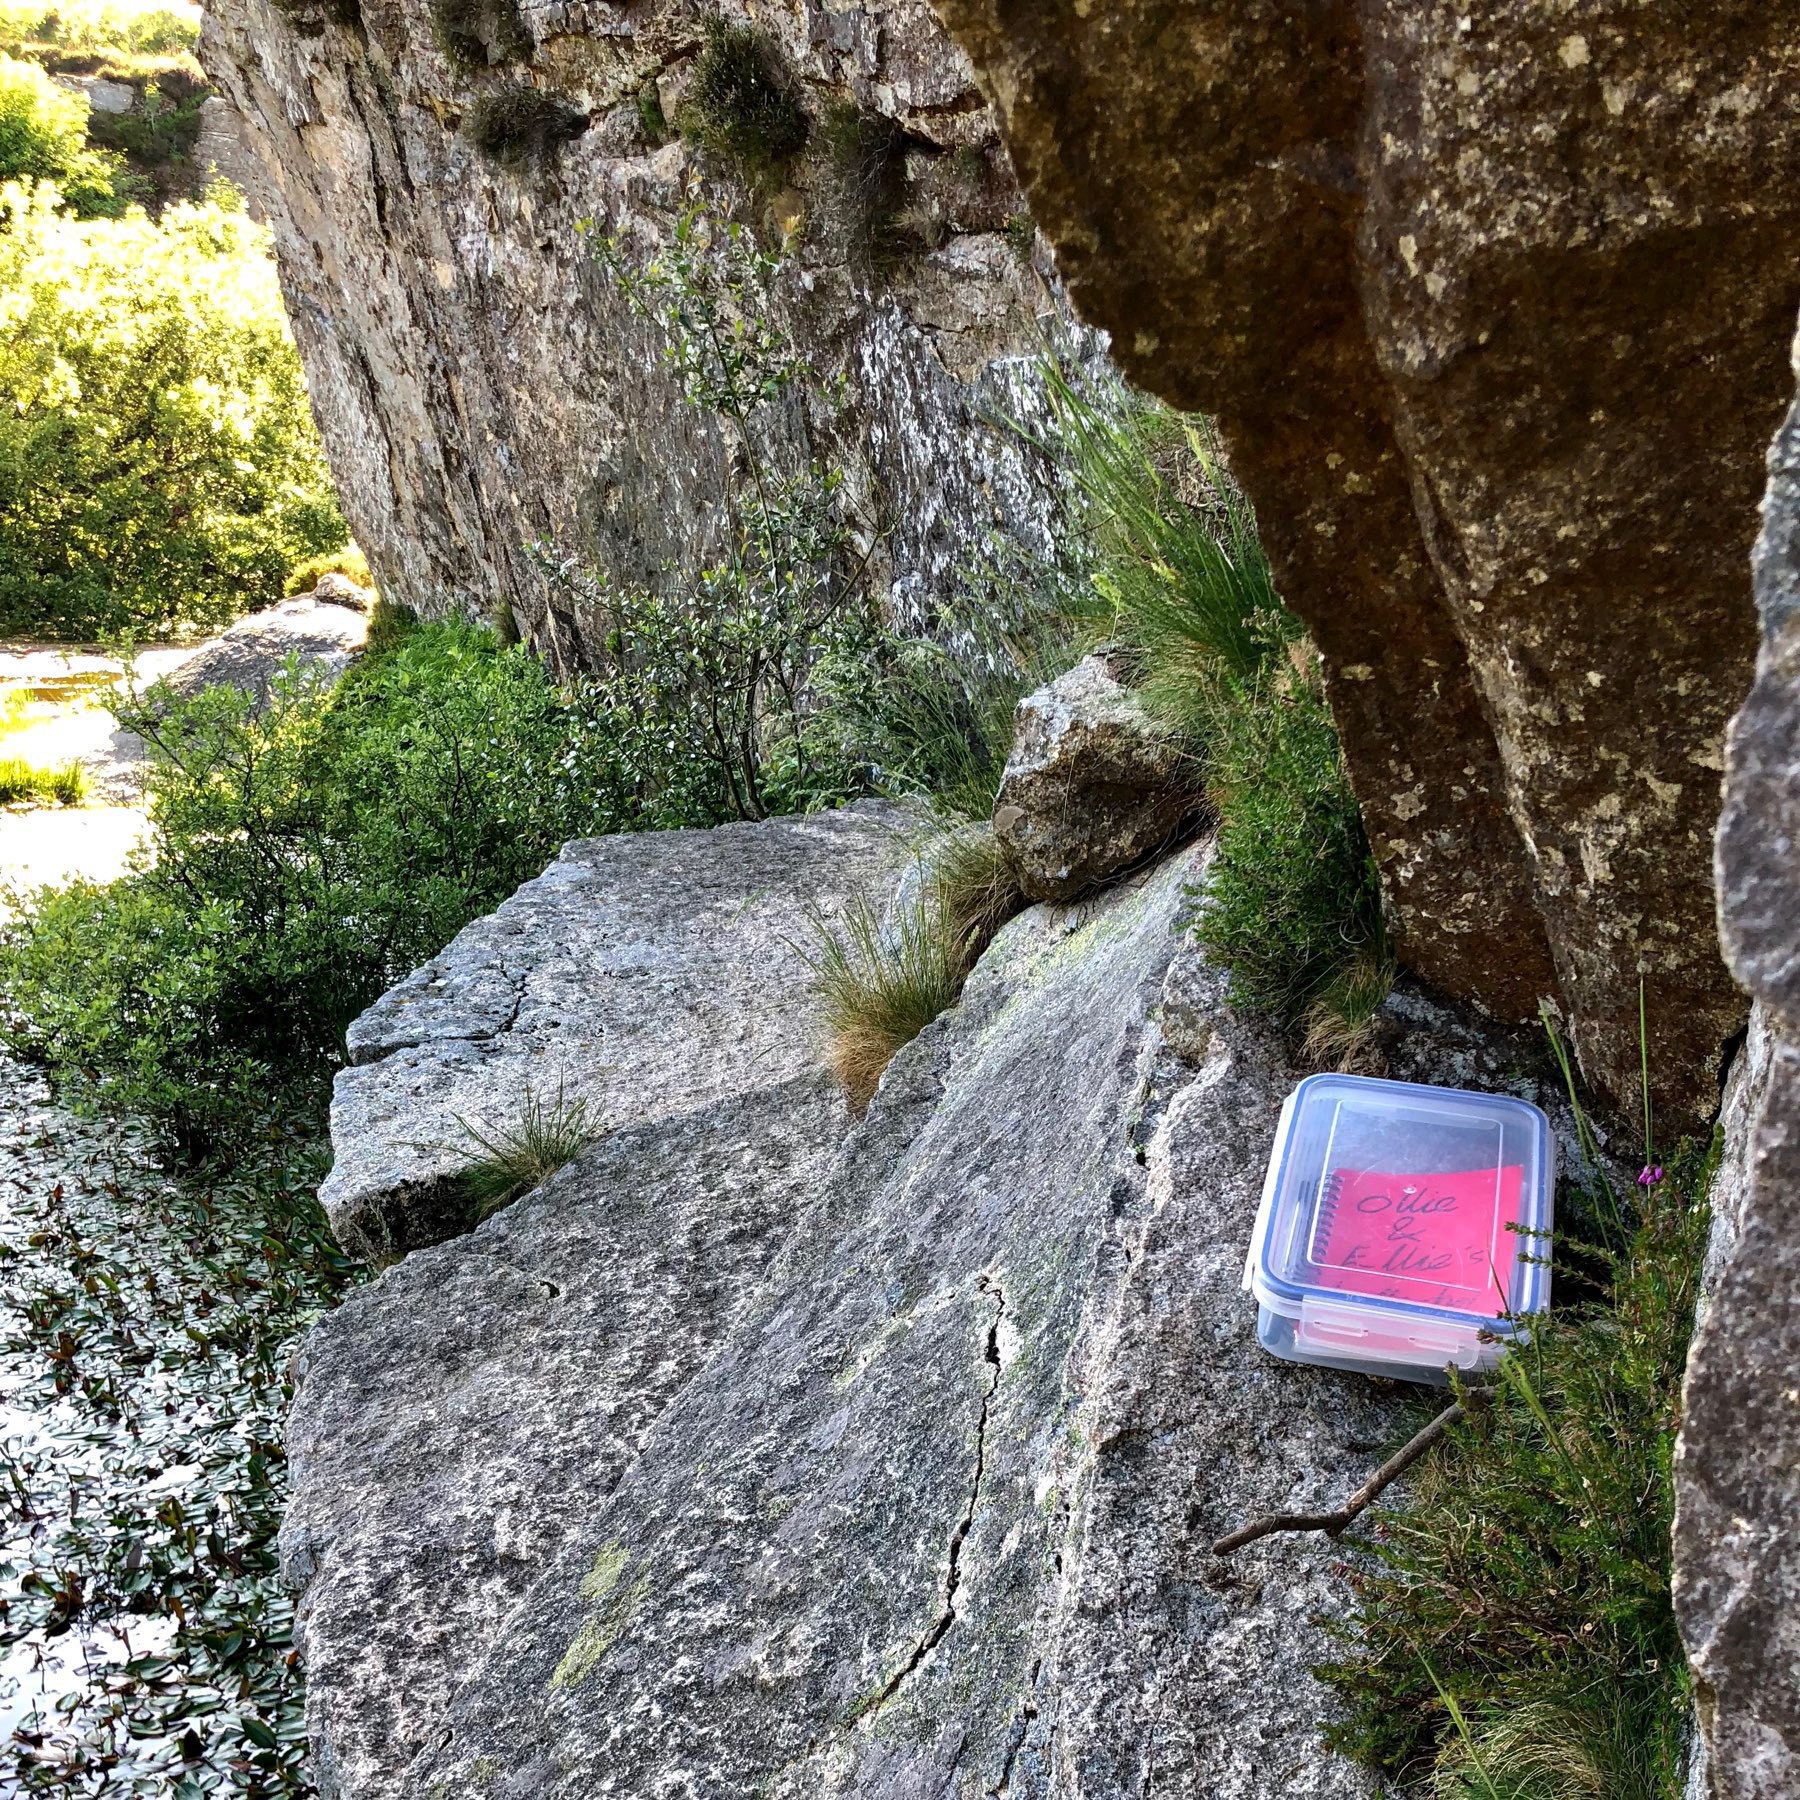 A letterbox for people to leave notes in, perched on a rock wall by a lake